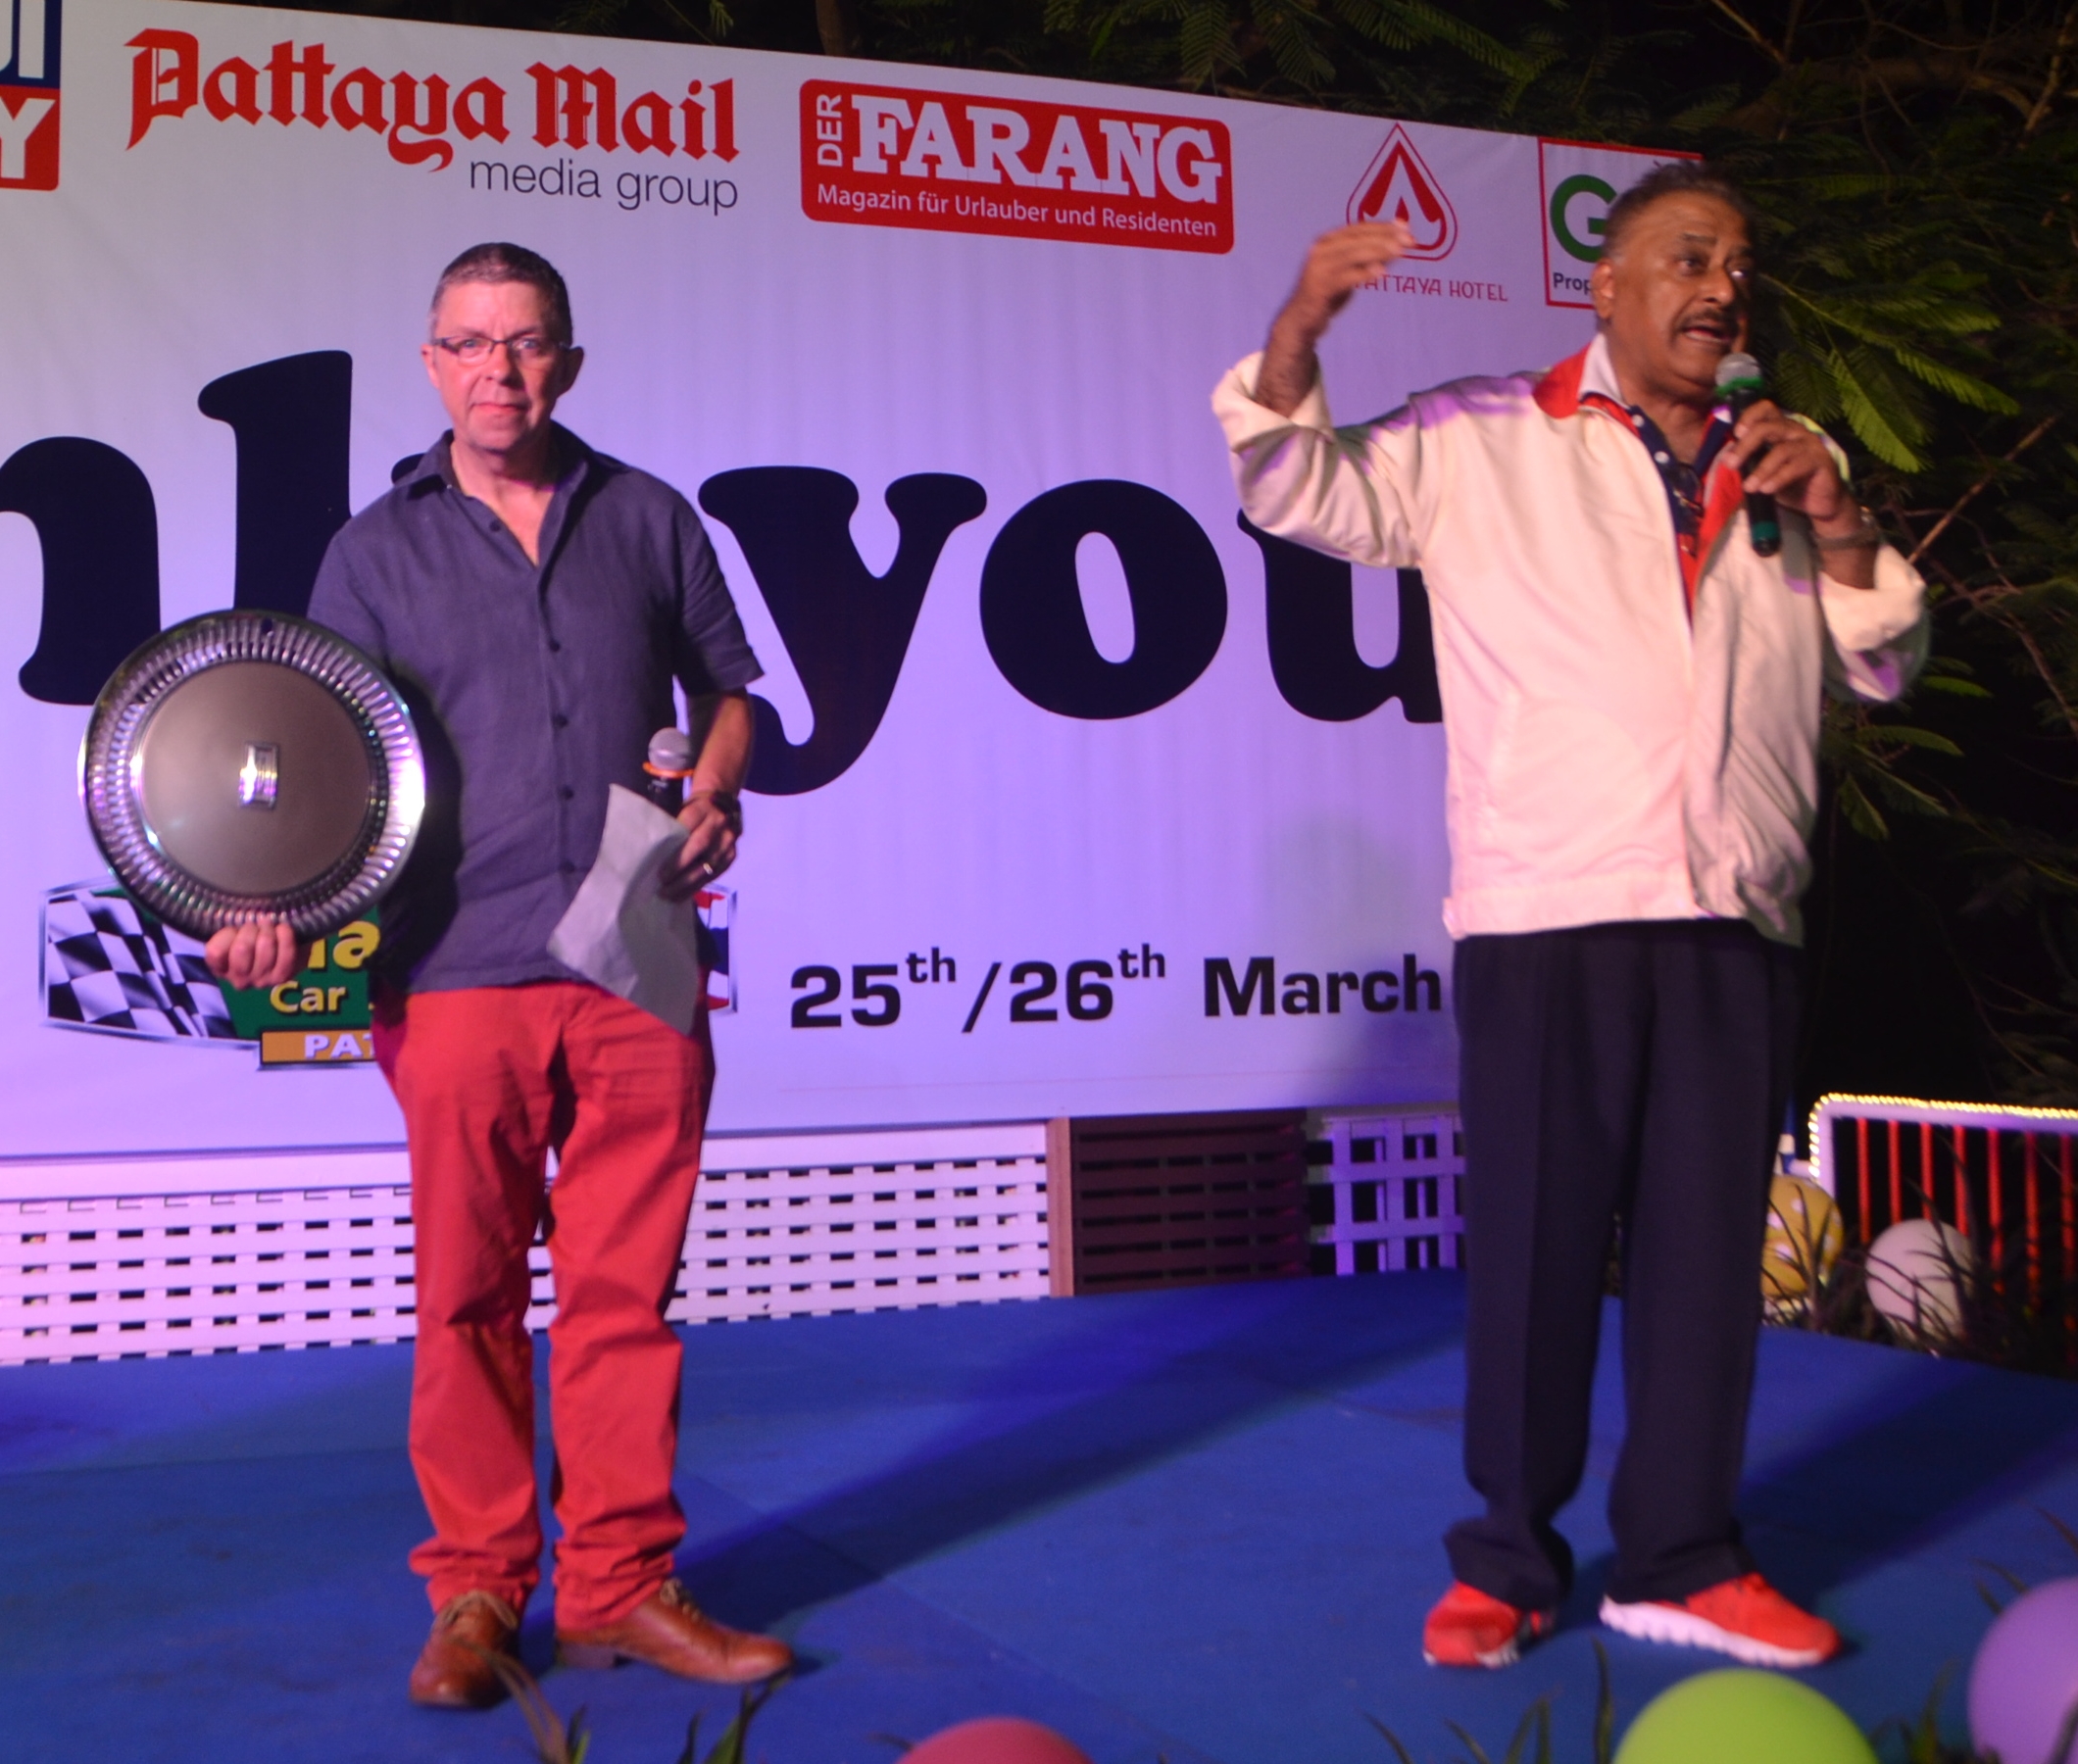 Paul Strachan and Peter Malhotra conduct the auction helping to raise over 100,000 baht.